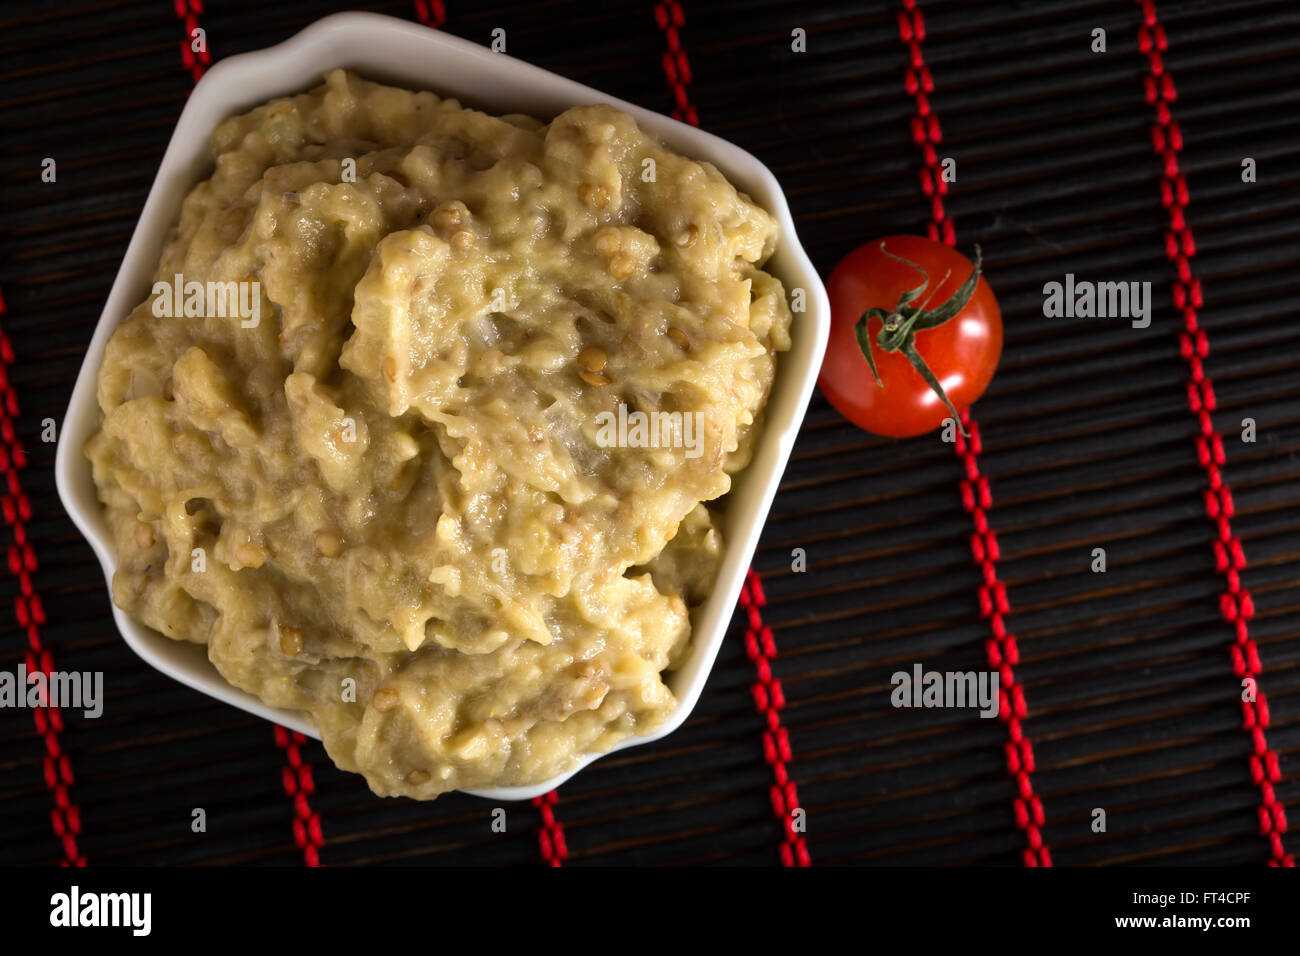 Eggplant salad with mayonnaise and one cherry tomato Stock Photo